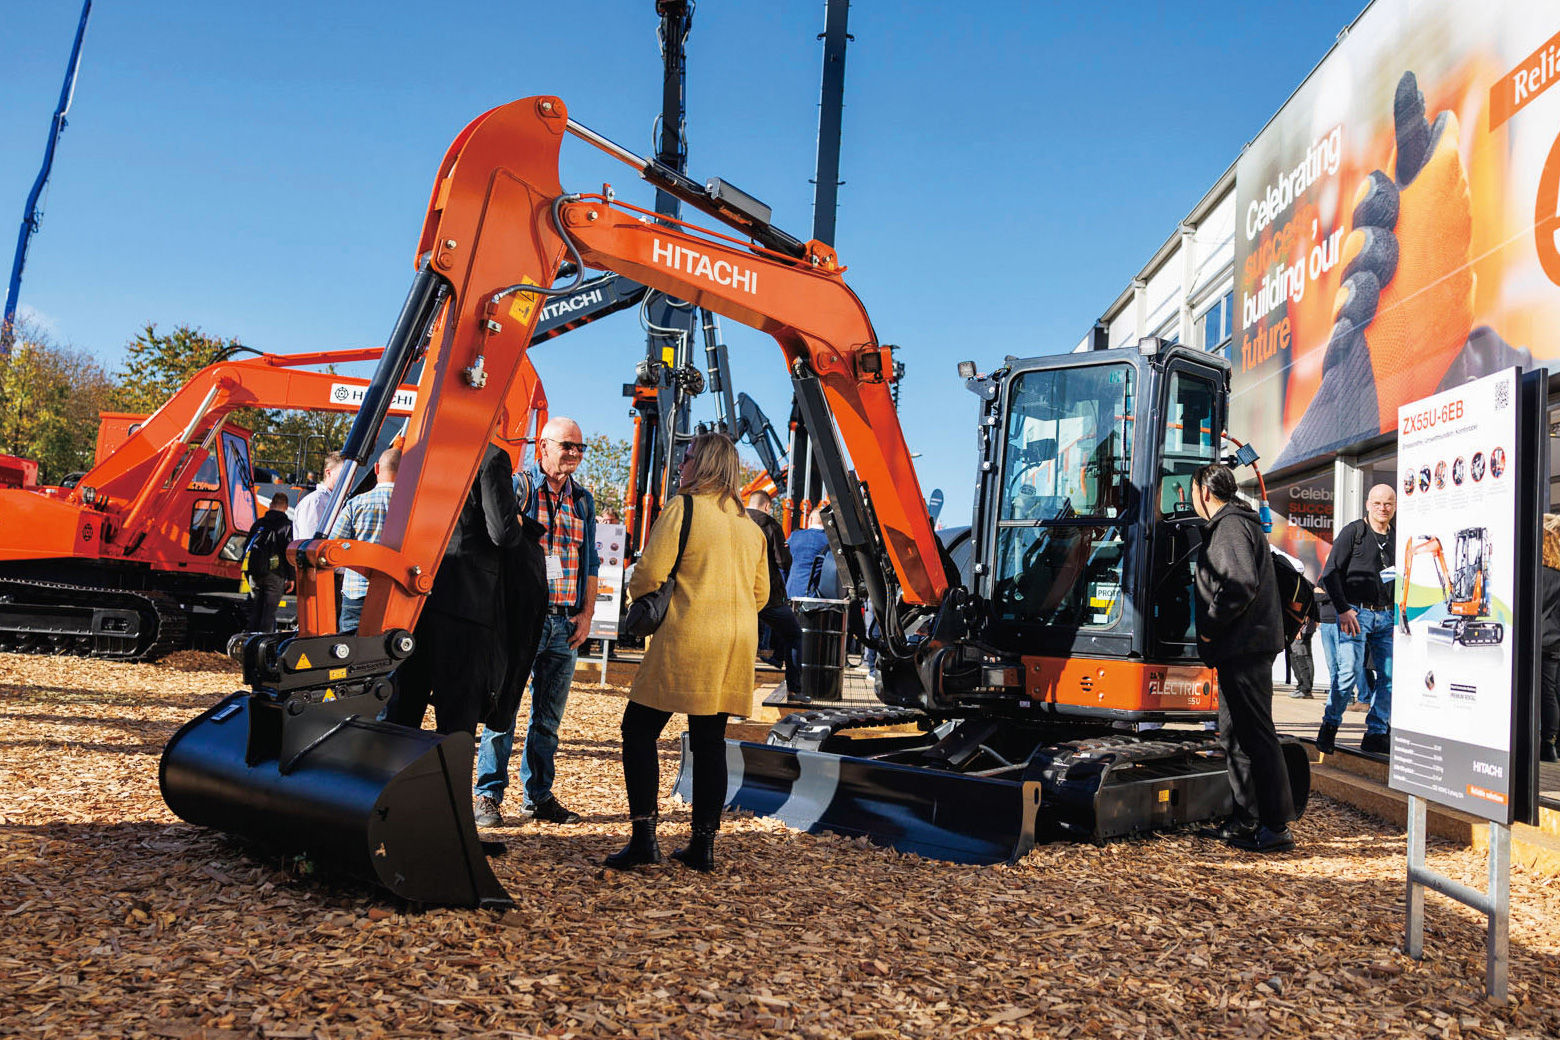 Hitachi Construction Machinery exhibited a range of small and mini battery operated excavators at bauma 2022.